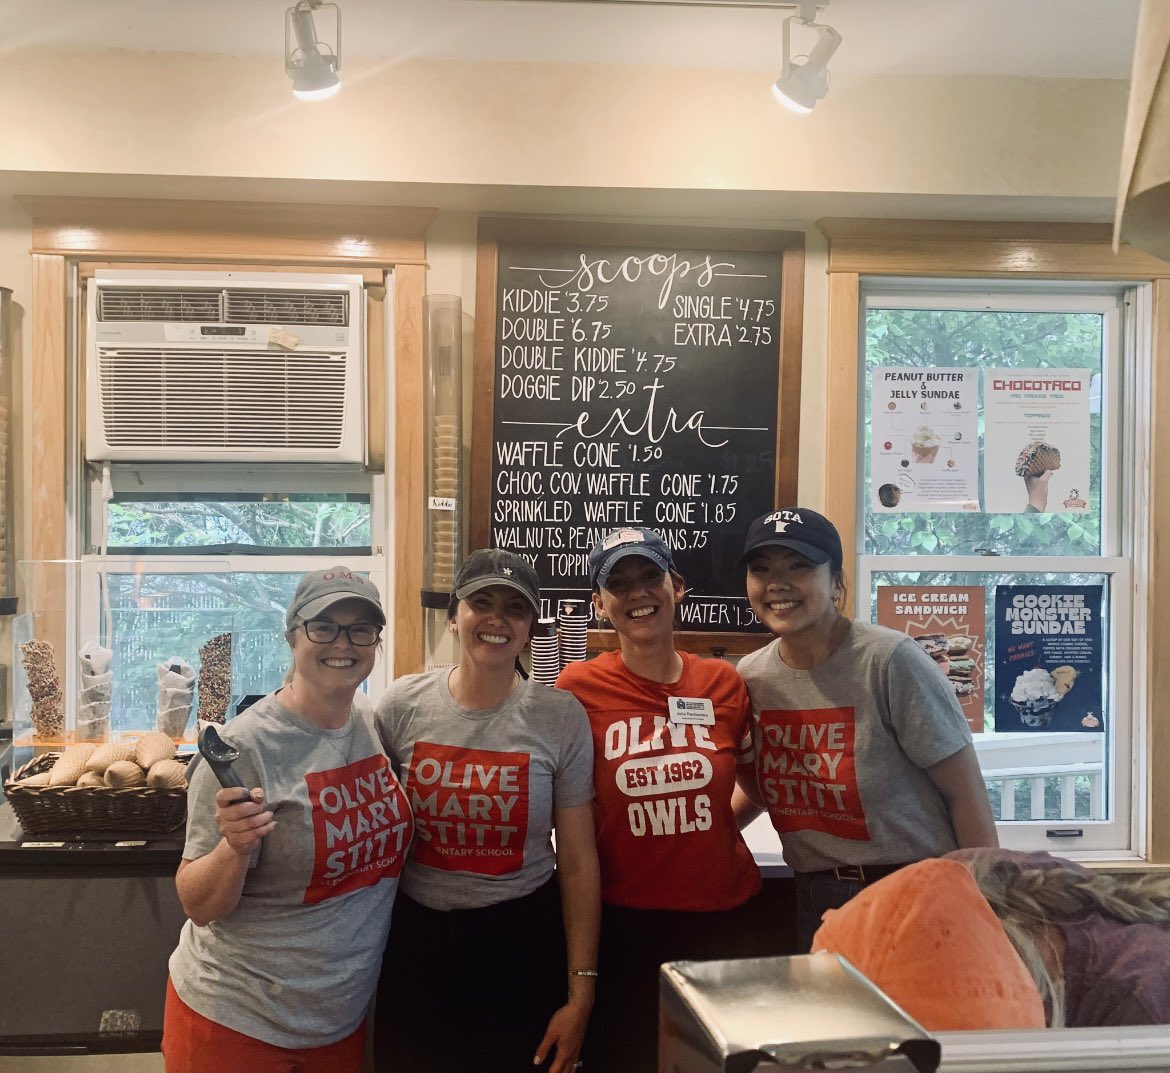 Scoop, scoop HOORAY!

We had the YUMMIEST school fundraiser today. 🍦🍨

Thank you to Capannari’s for hosting such a fun COOLEST SCHOOL competition and to our celebrity scoopers for serving up school spirit!

#oliveowls #olivemarystitt #coolestschool #schoolfundraiser #olivepta